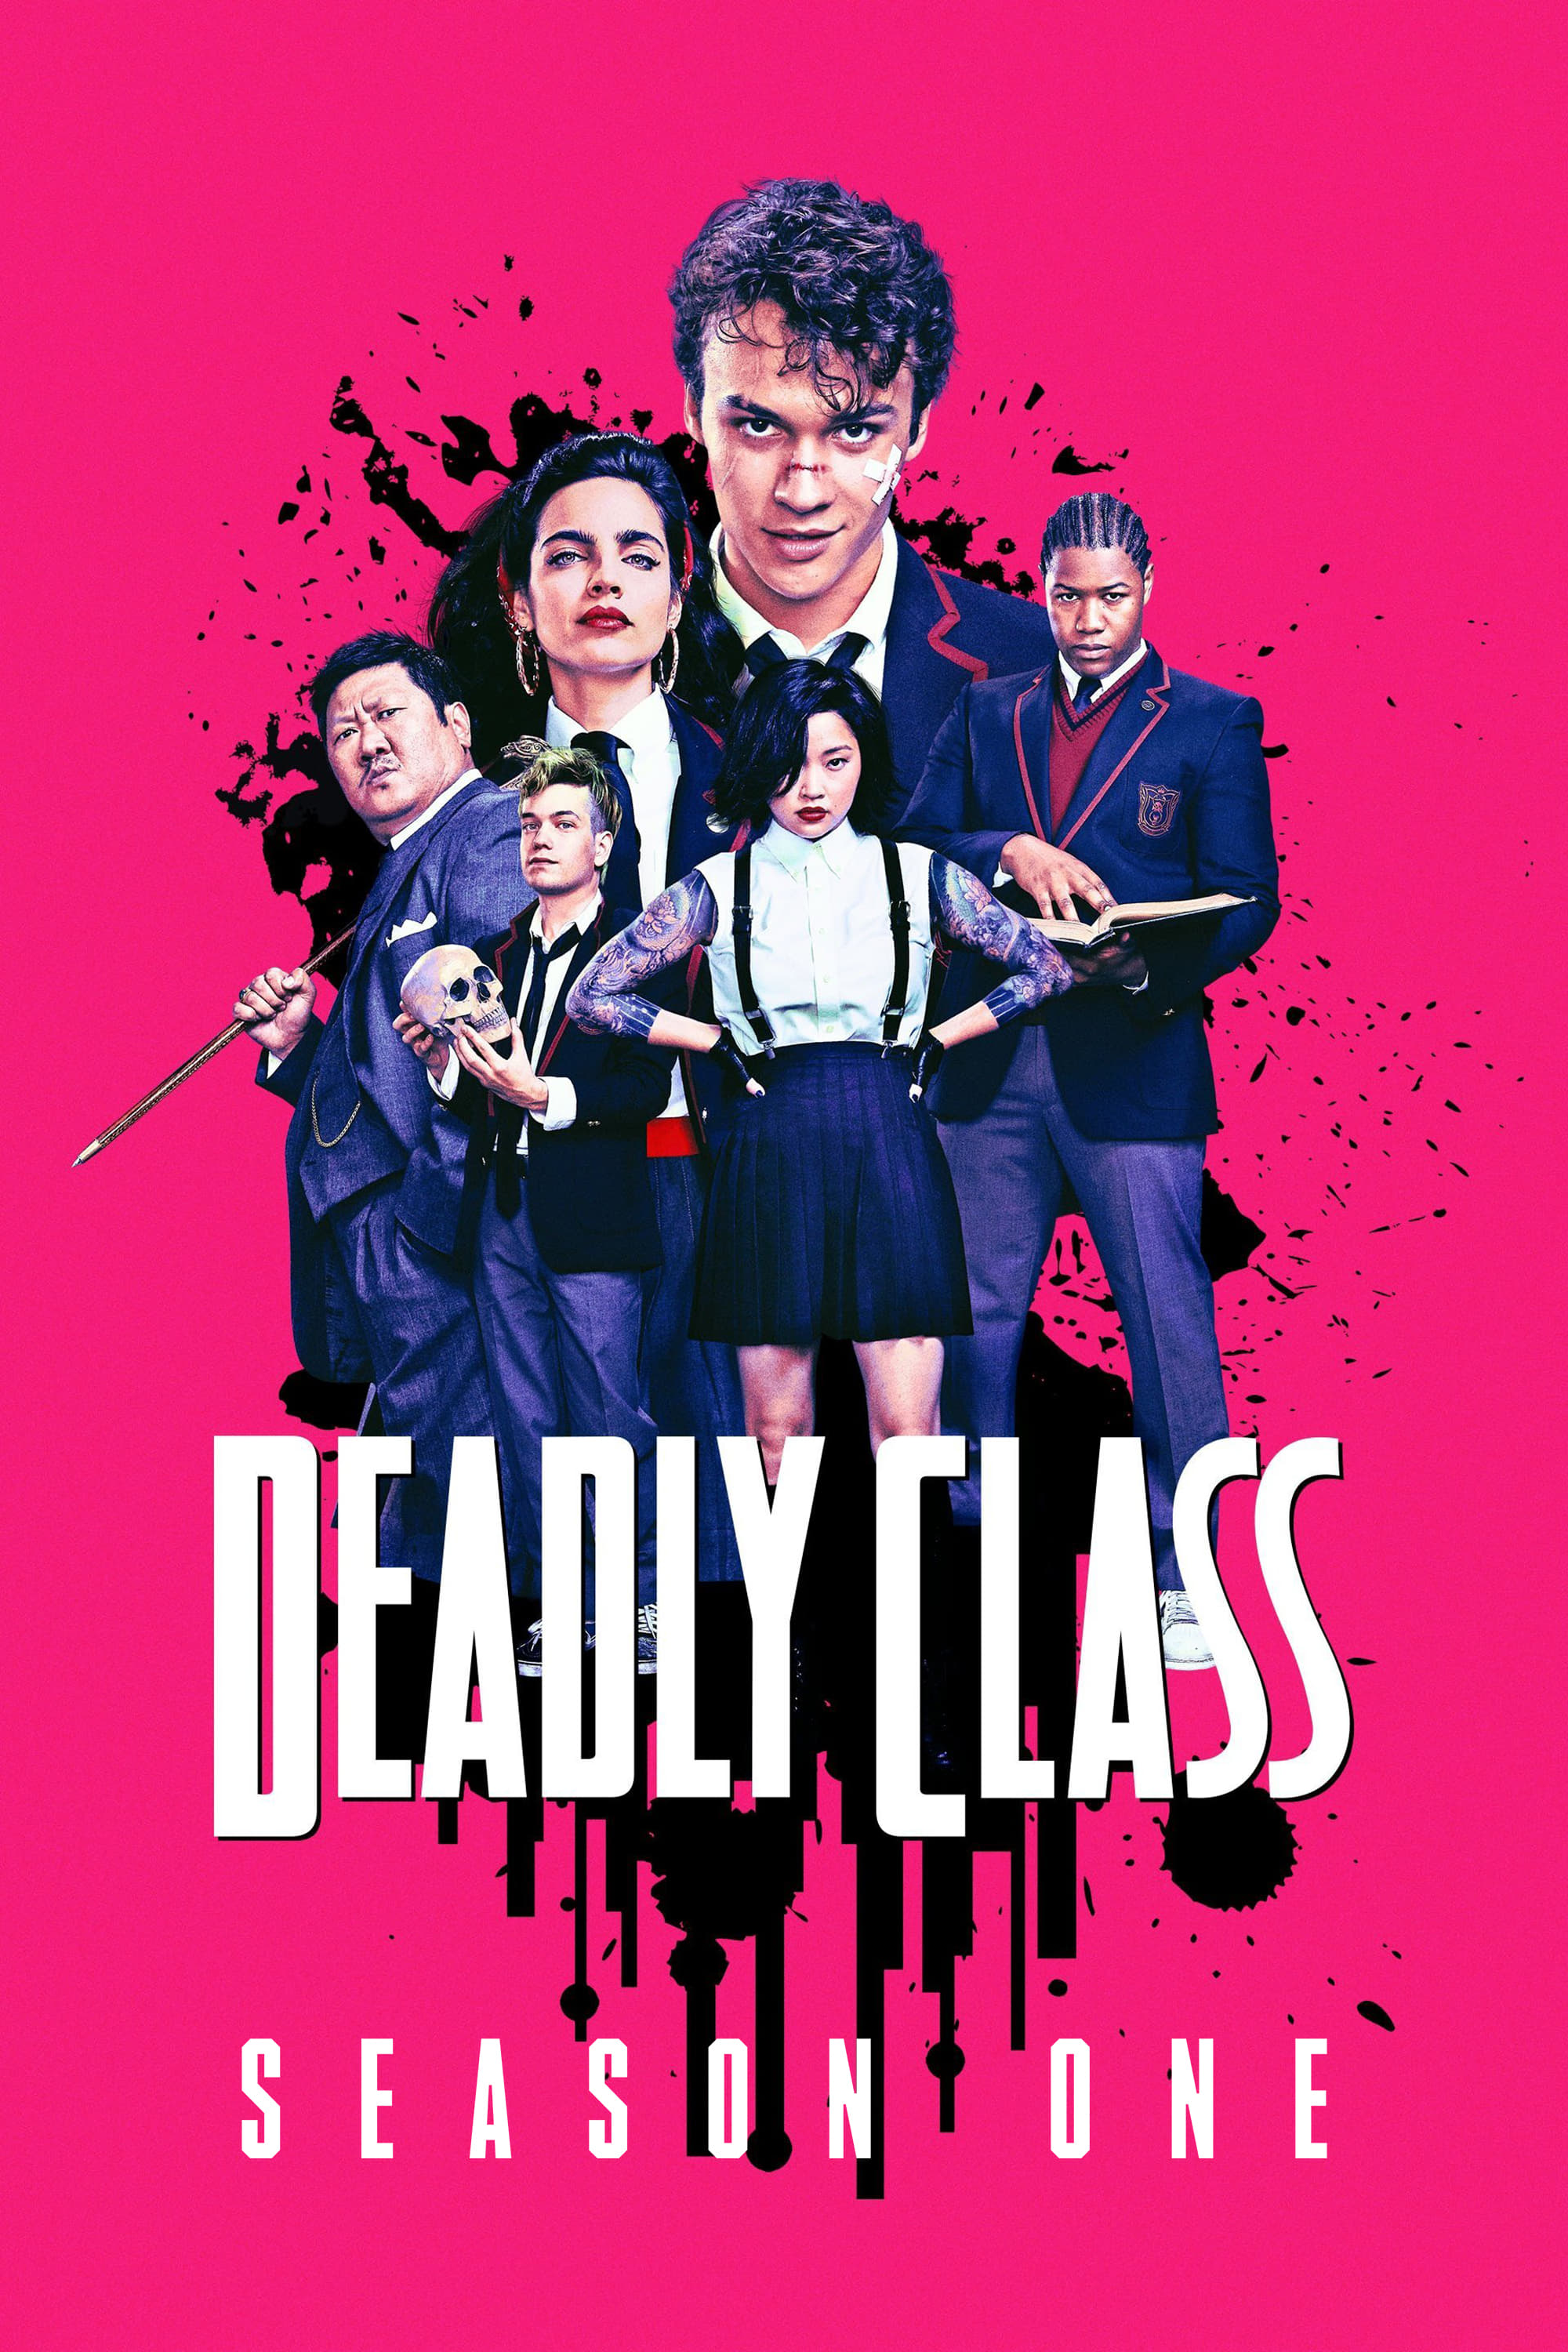 Deadly Class poster